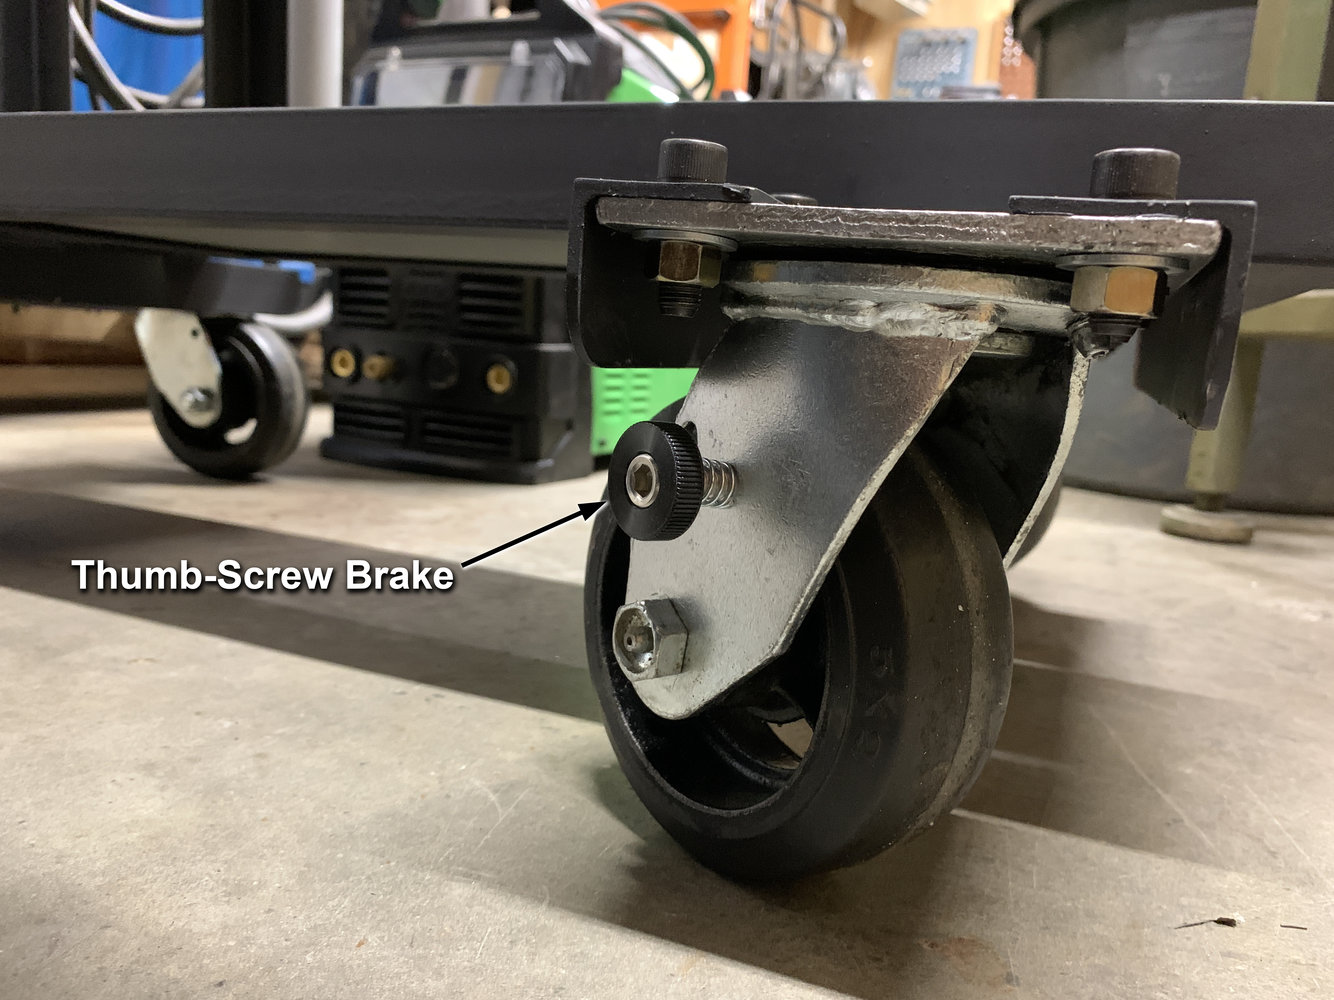 Thumb-screw brake installed on front casters.